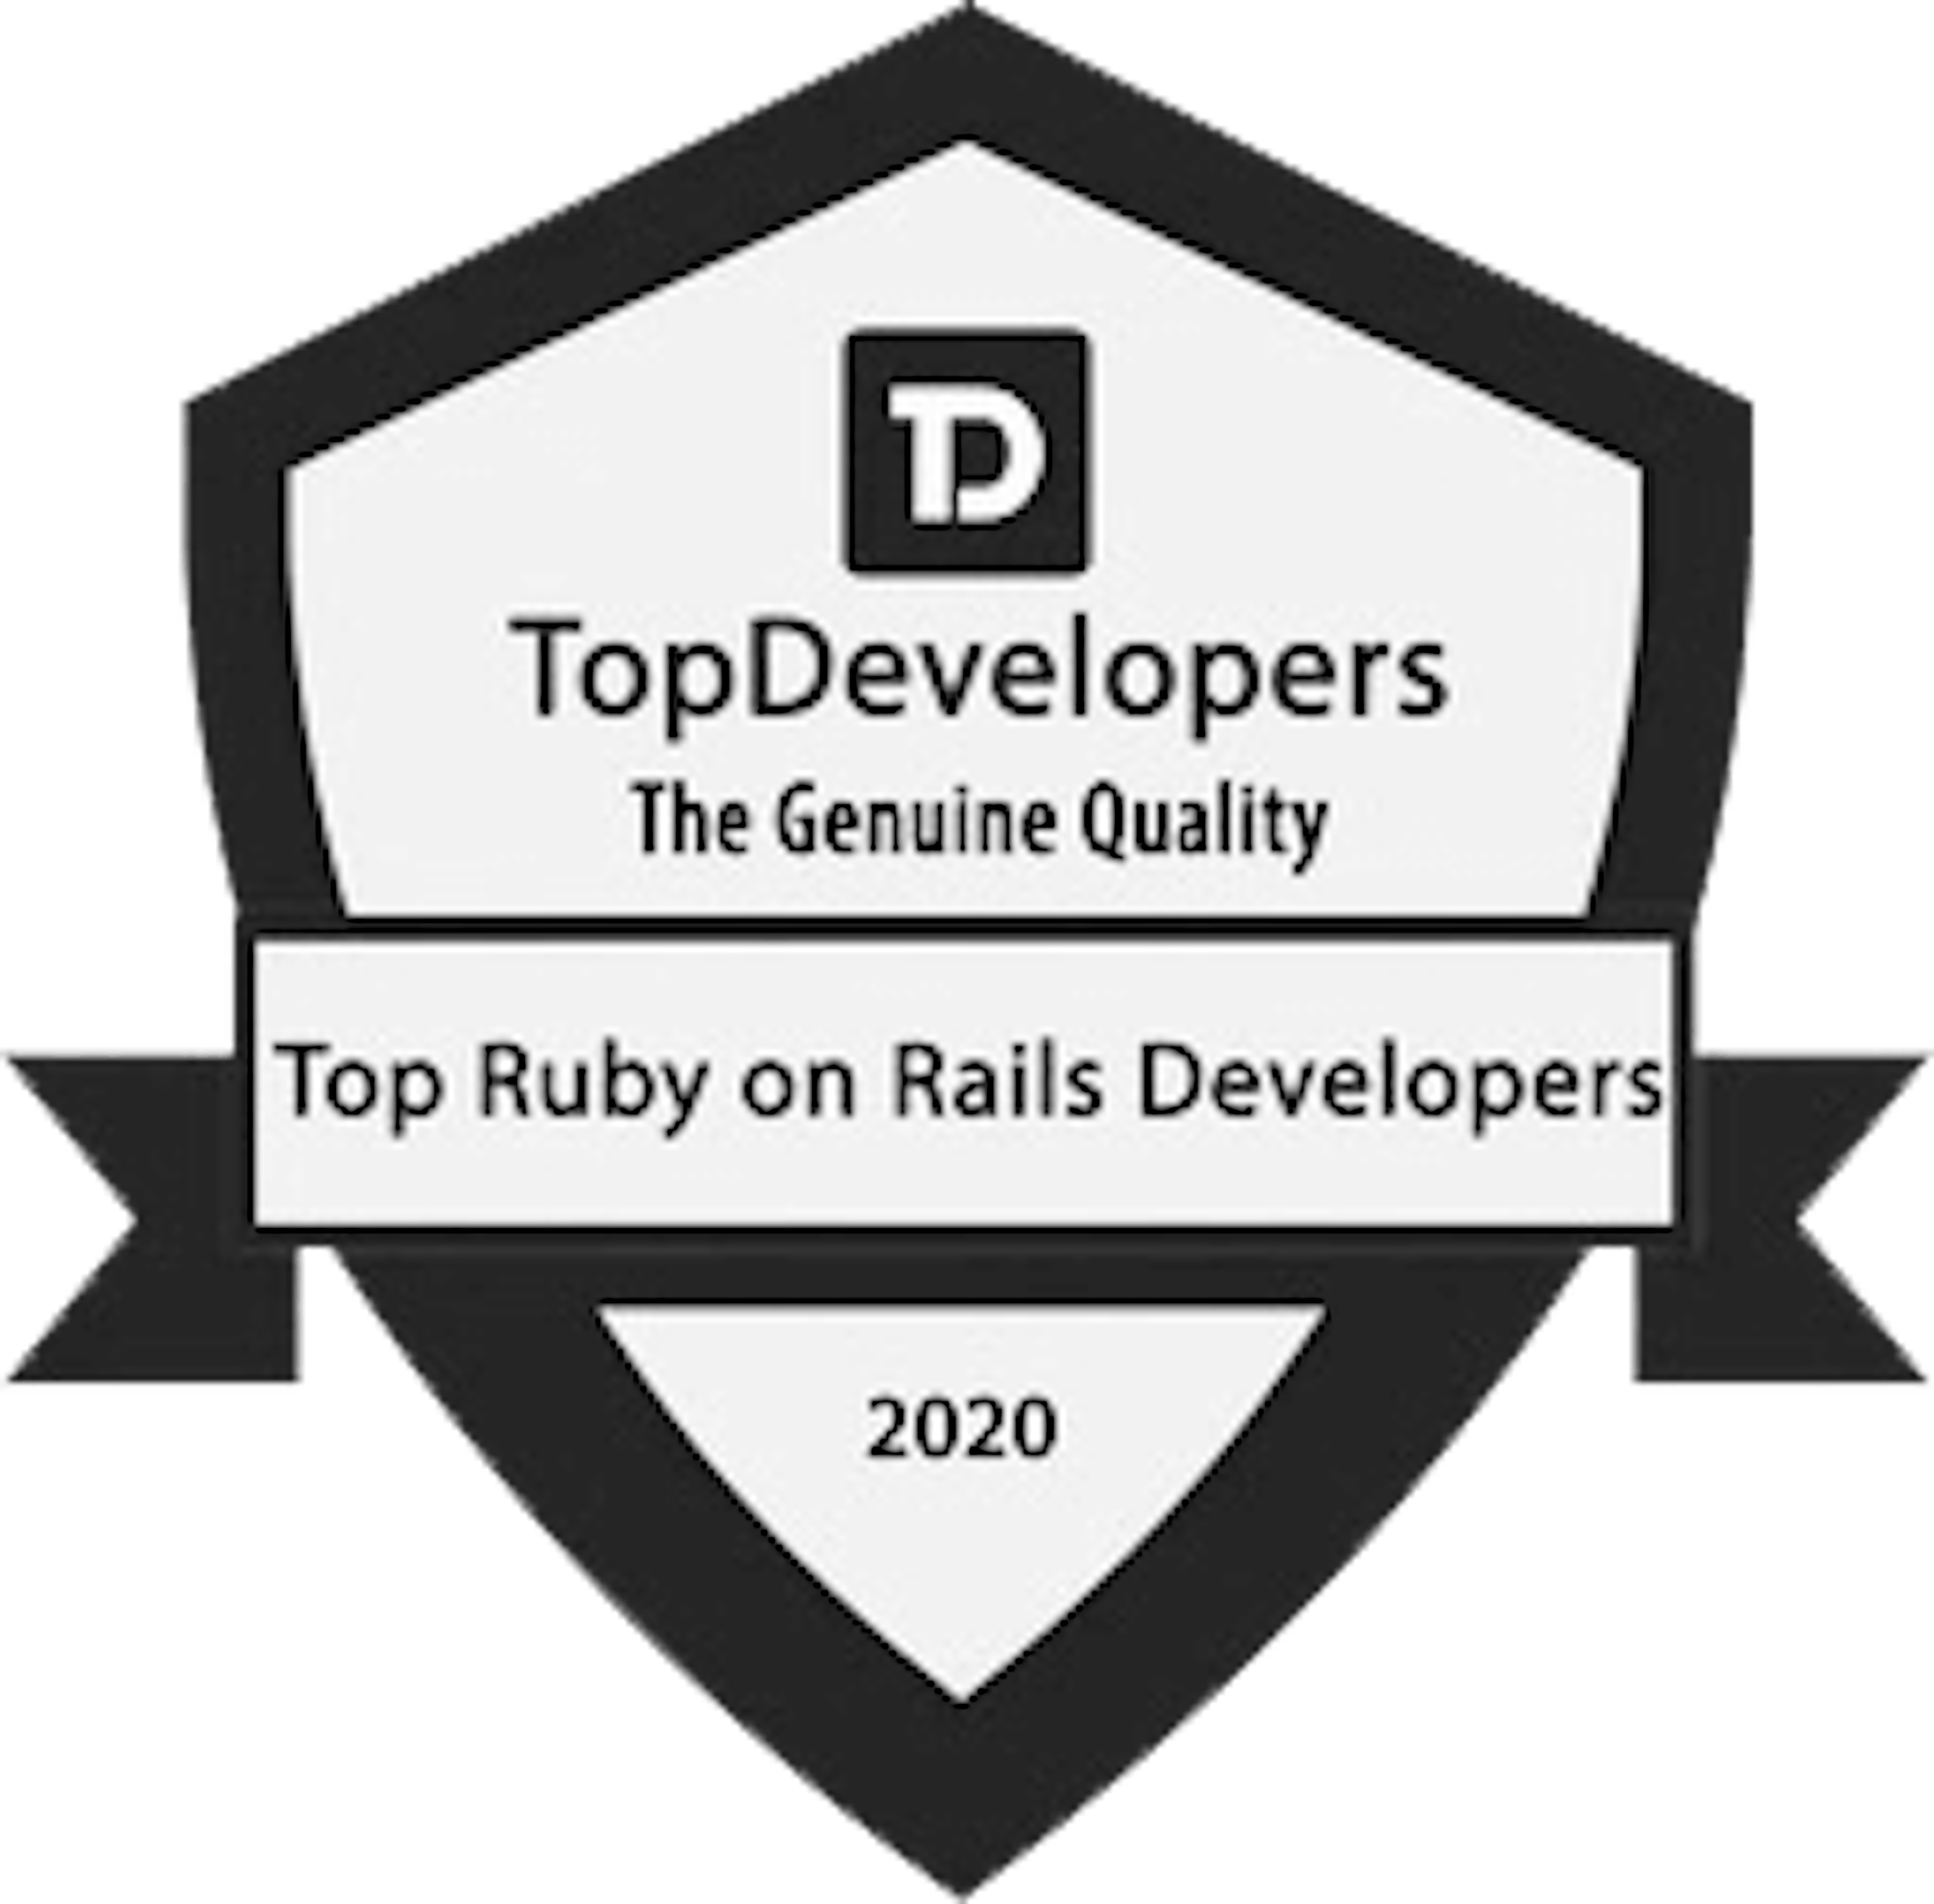 Top Ruby on Rails Developers - TopDevelopers 2020